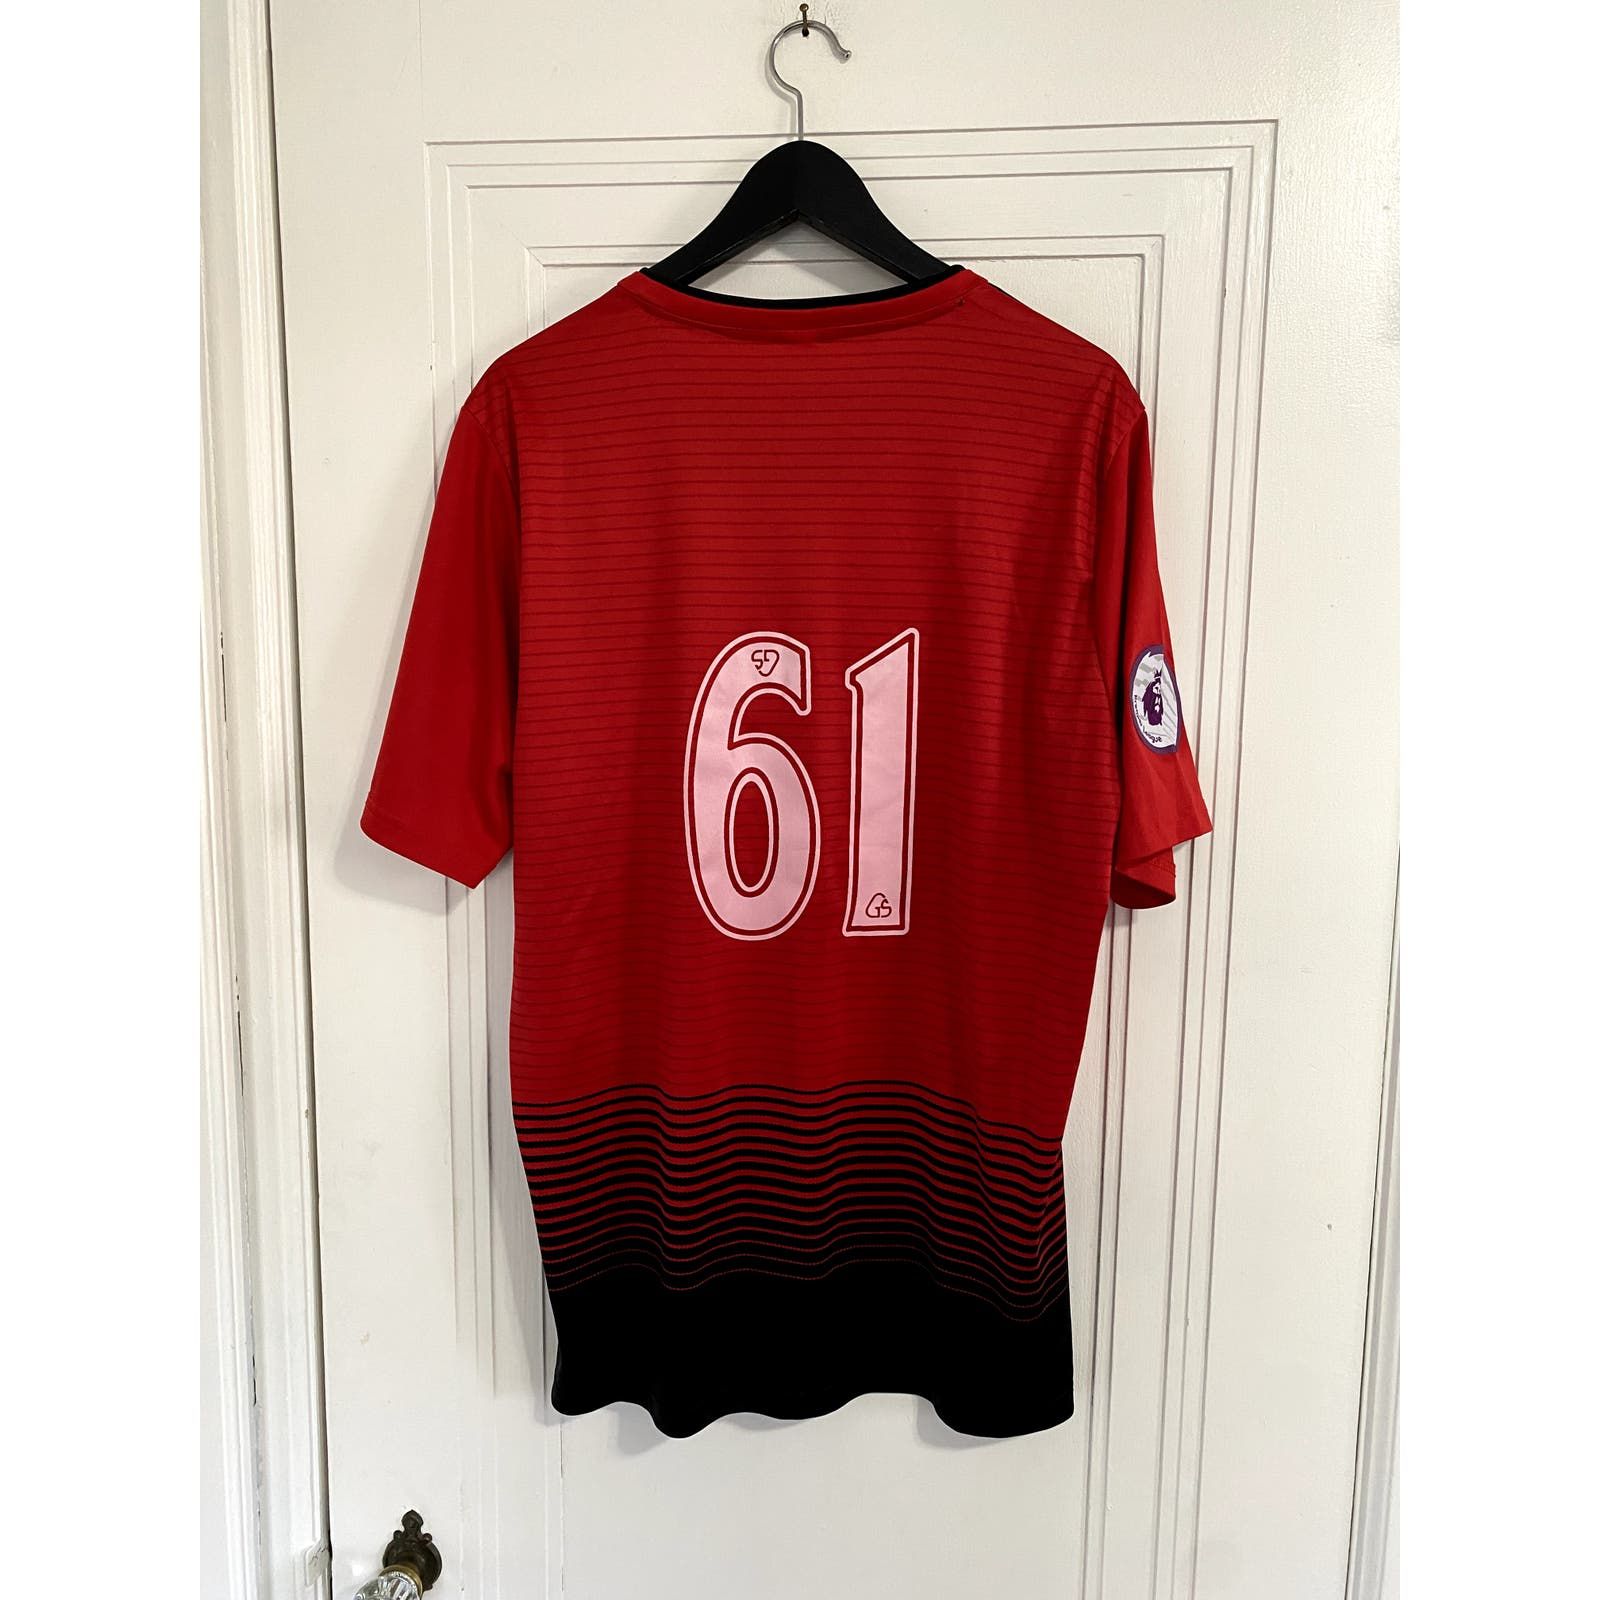 Manchester United Manchester United FC Soccer Jersey Size XL Size US XL / EU 56 / 4 - 6 Thumbnail